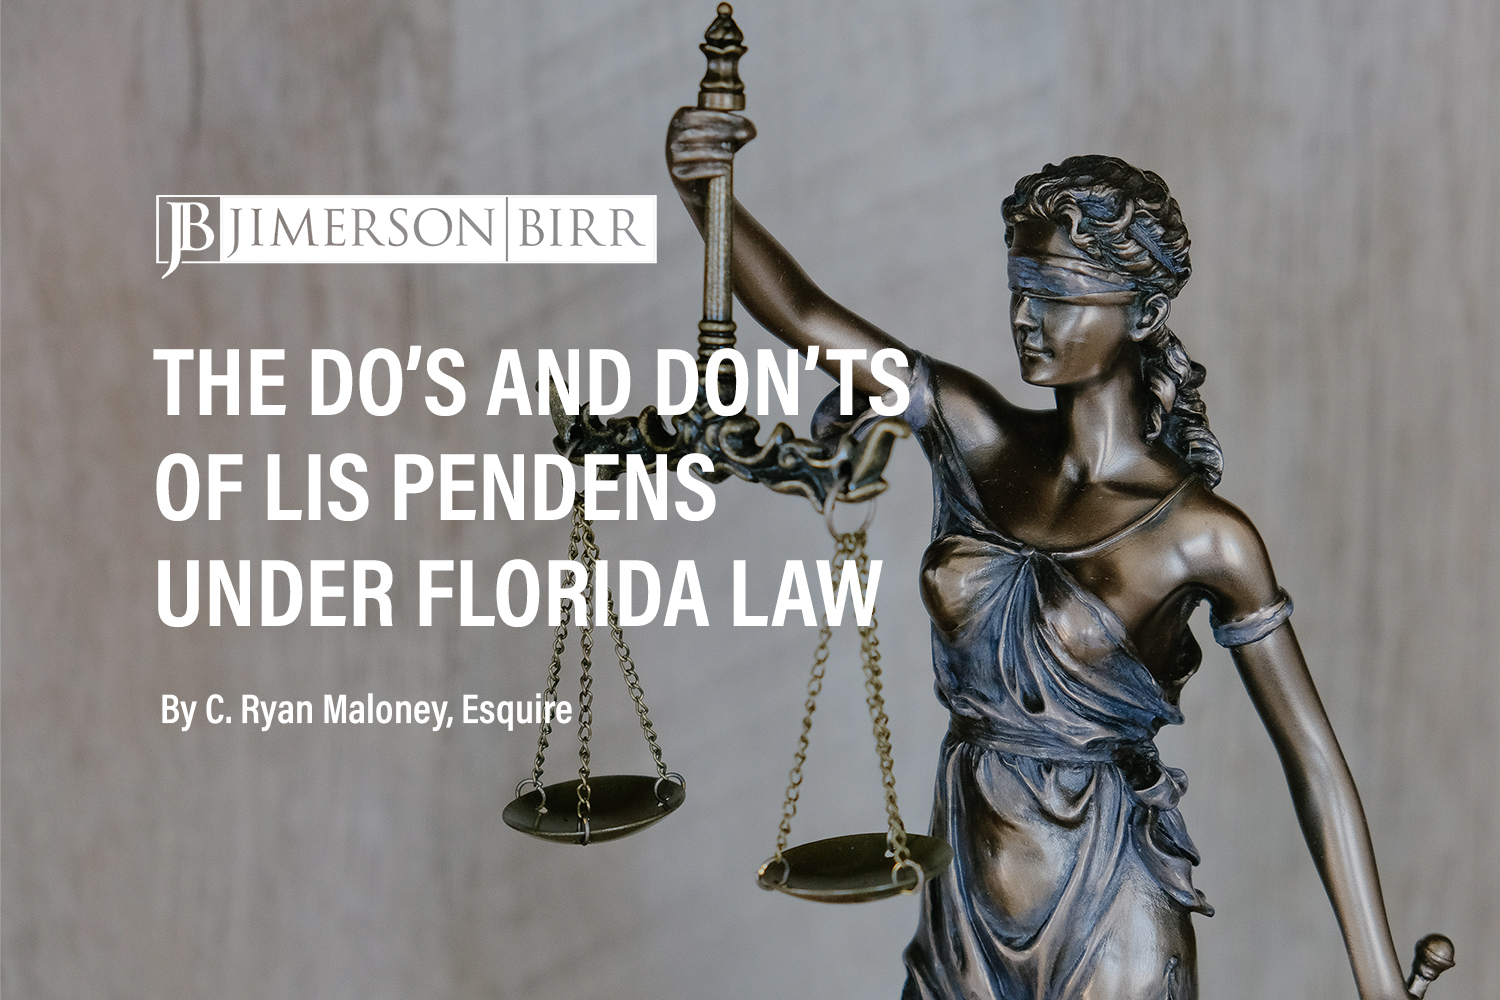 The Do’s and Don’ts of Lis Pendens in Florida